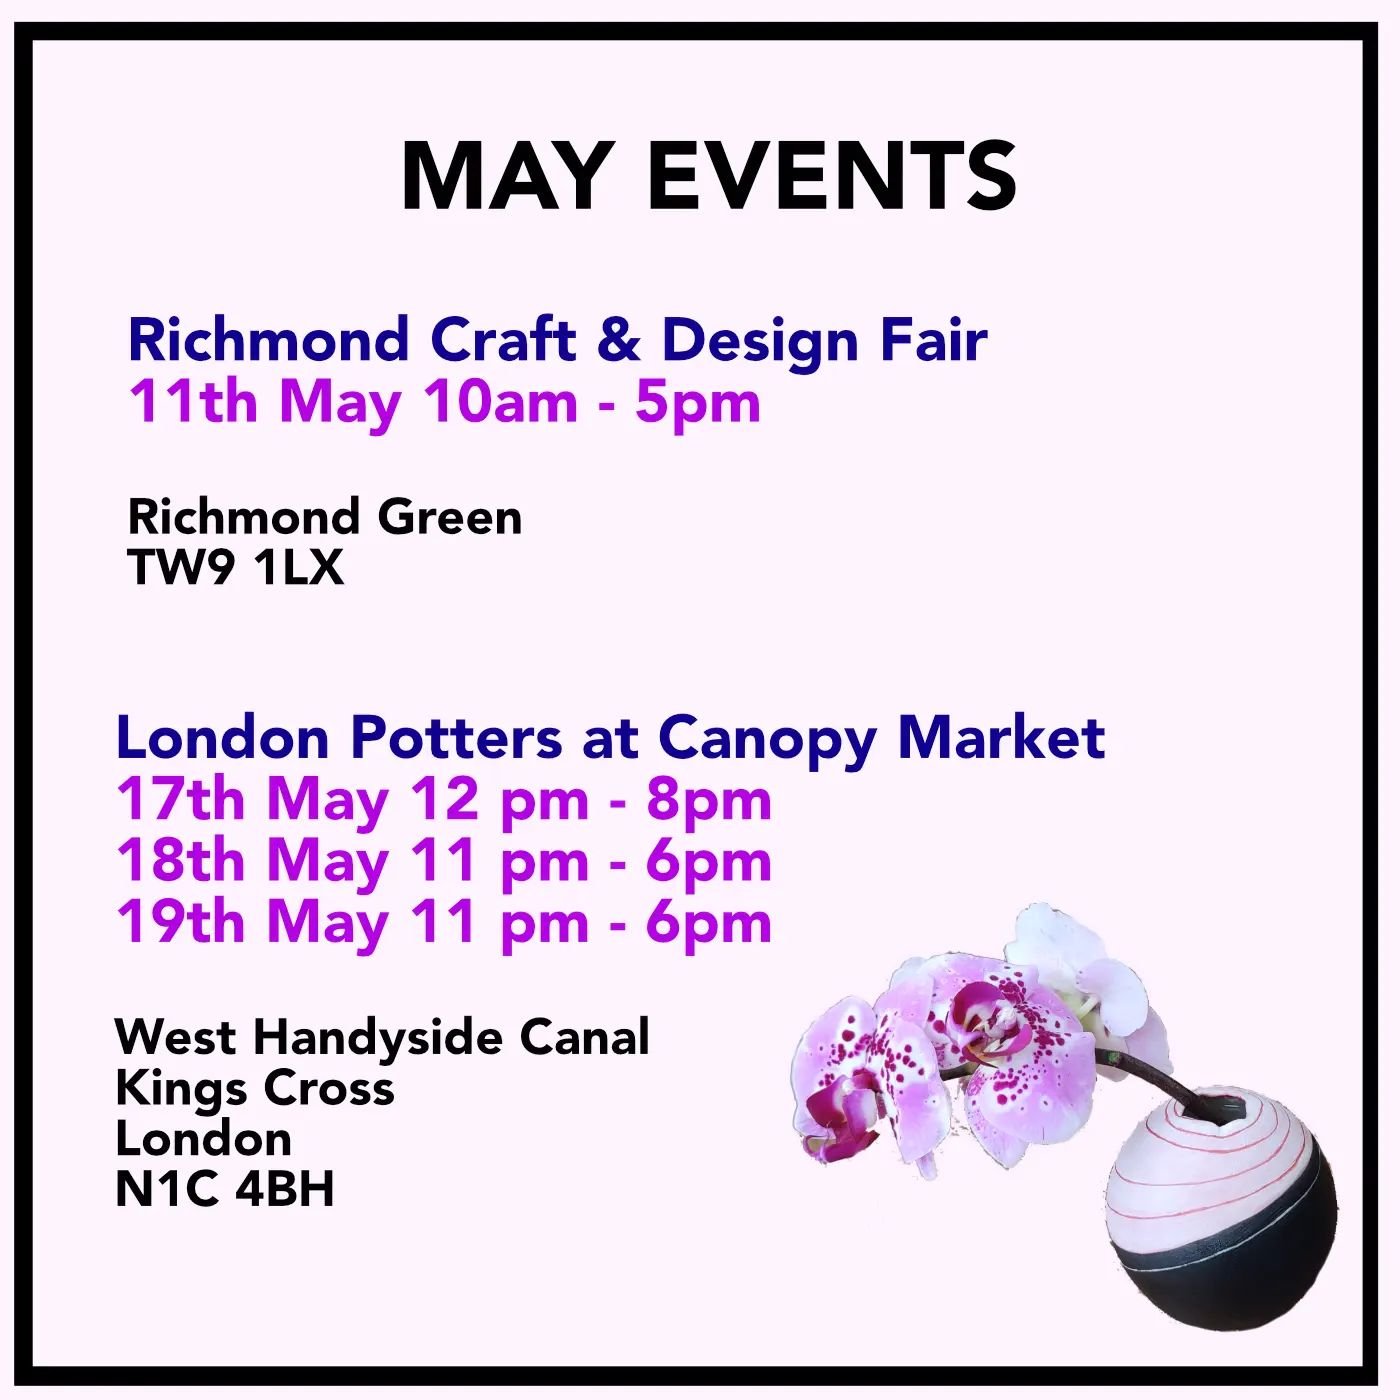 Looking forward to my next events!
.
Richmond Craft &amp; Design Fair
Saturday 11th May 10am - 5pm
.
Richmond Green
TW9 1LX
.
@richmondcraftfair @richmondmayfair
.
.
London Potters at Canopy Market
.
Friday 17th May 12pm - 8pm
Saturday 18th May 11am 